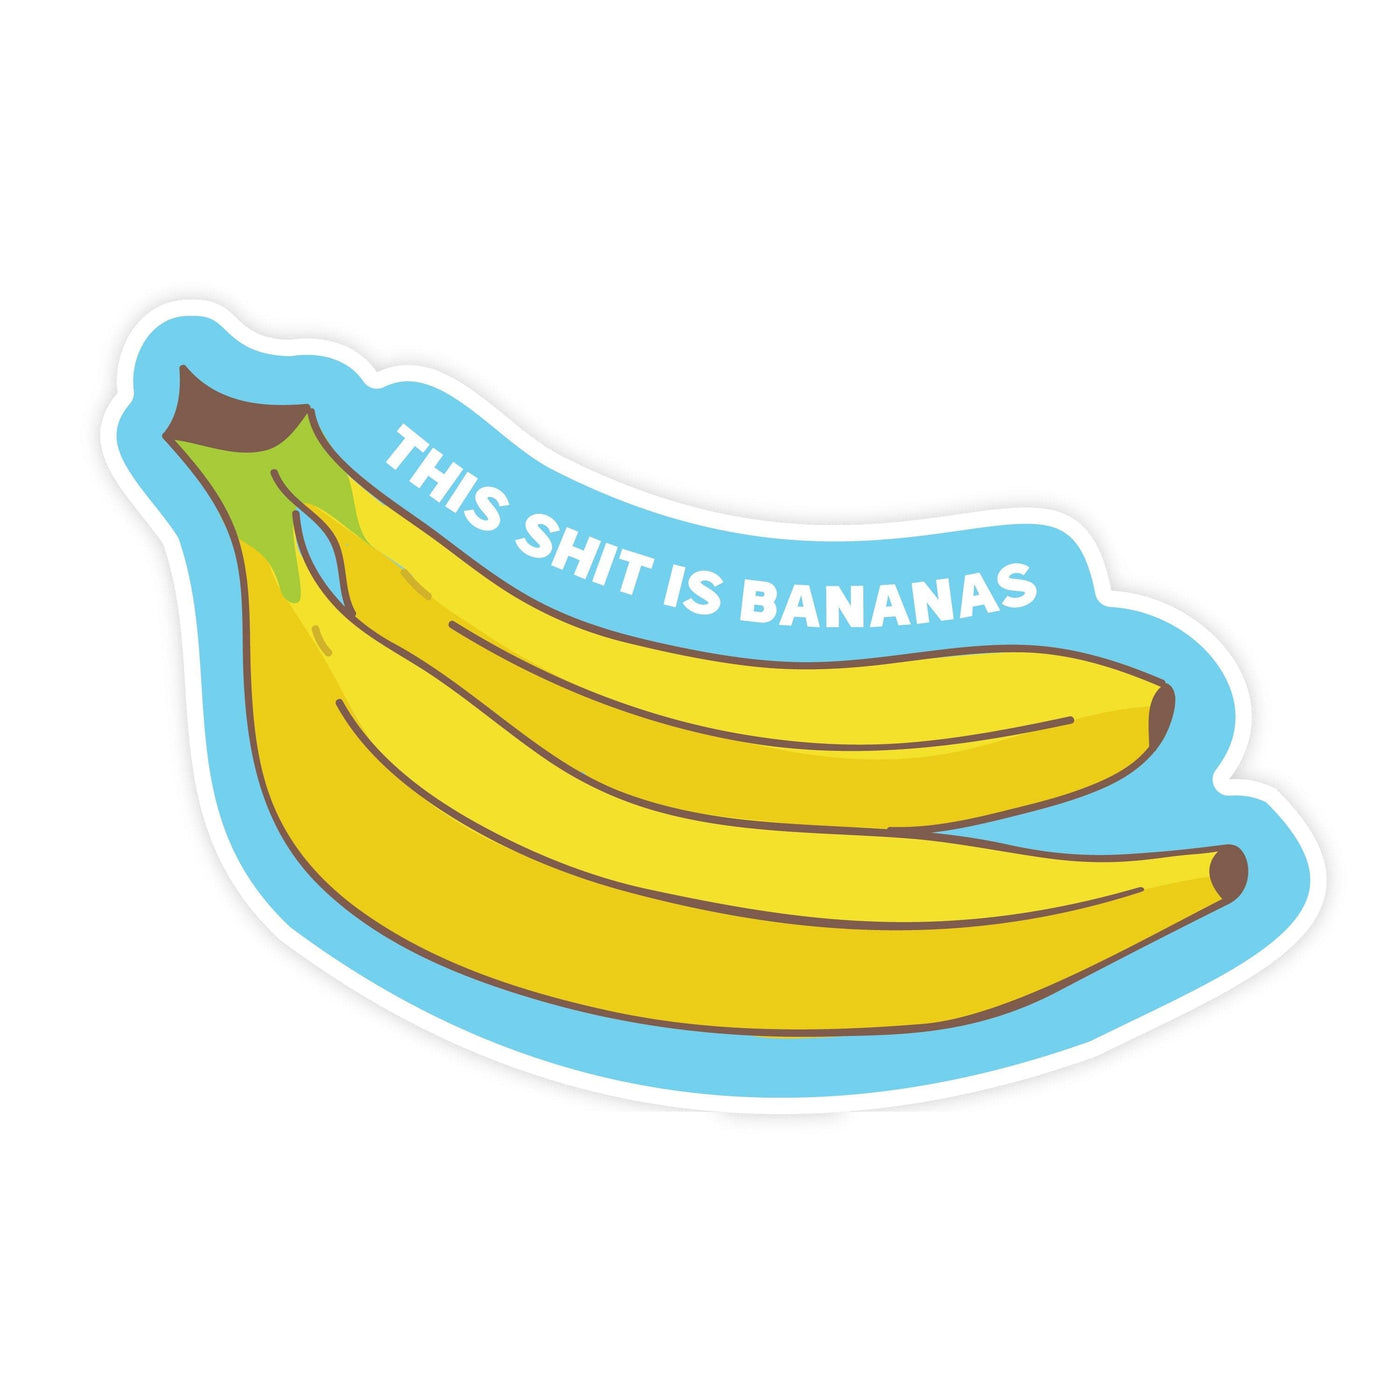 This Shit is Bananas | Sticker - The Local Space